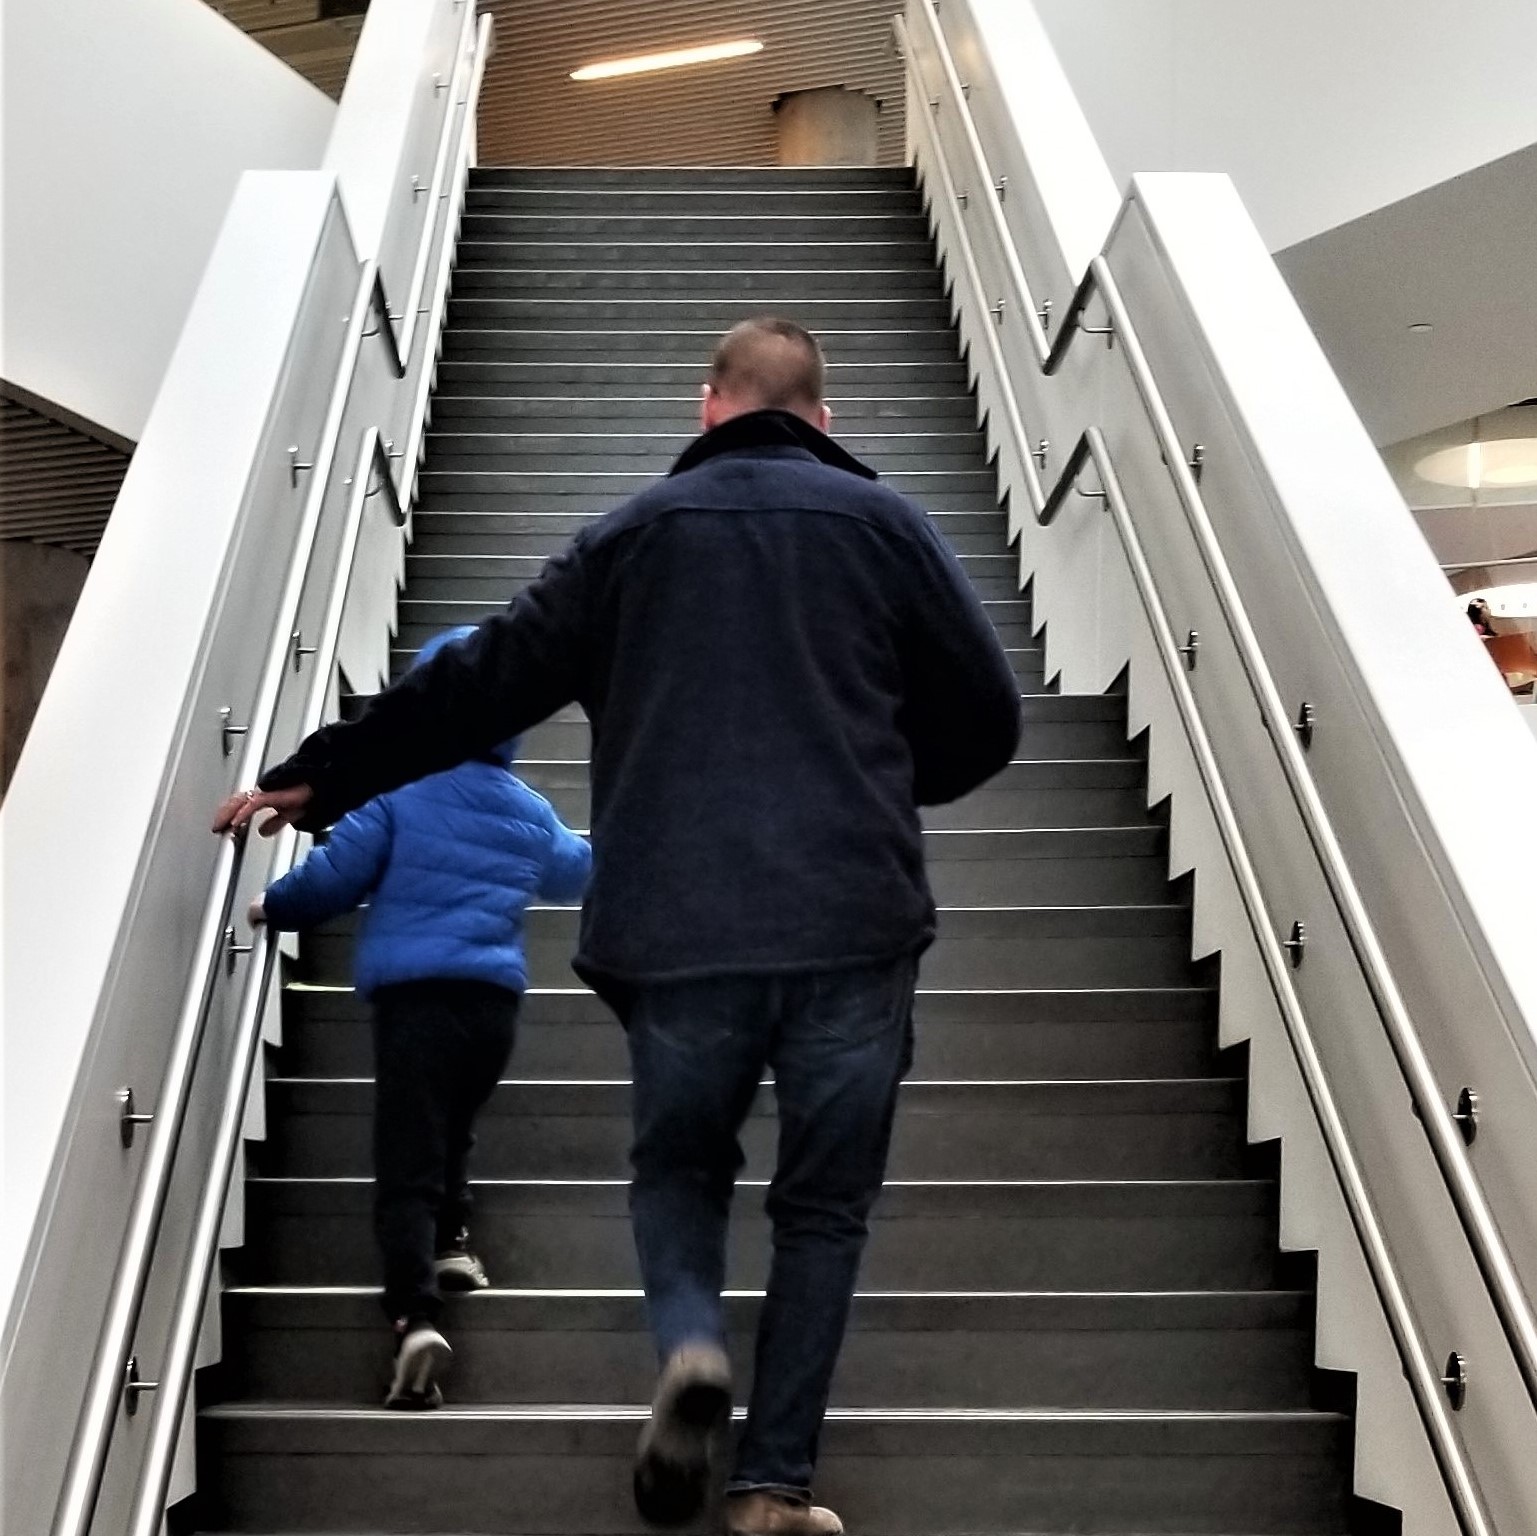 A man and young child walking up a staircase holding two heights of handrail.